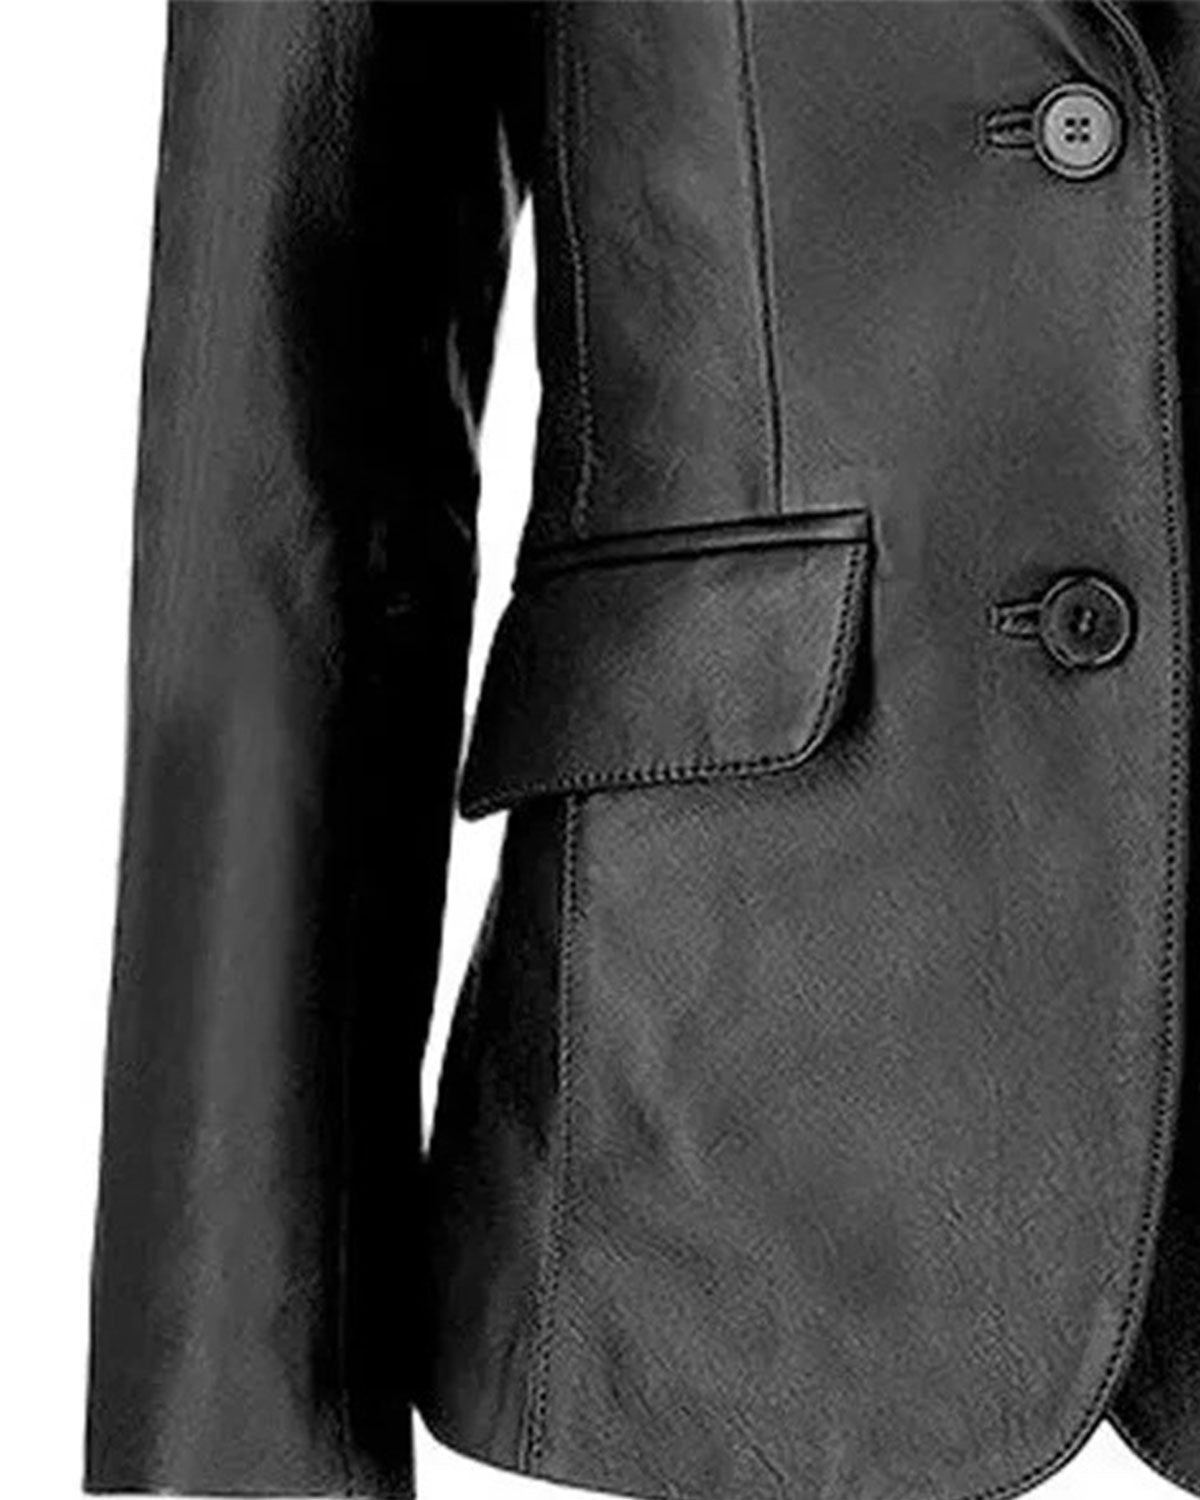 MotorCycleJackets Womens Two Buttoned Black Leather Blazer